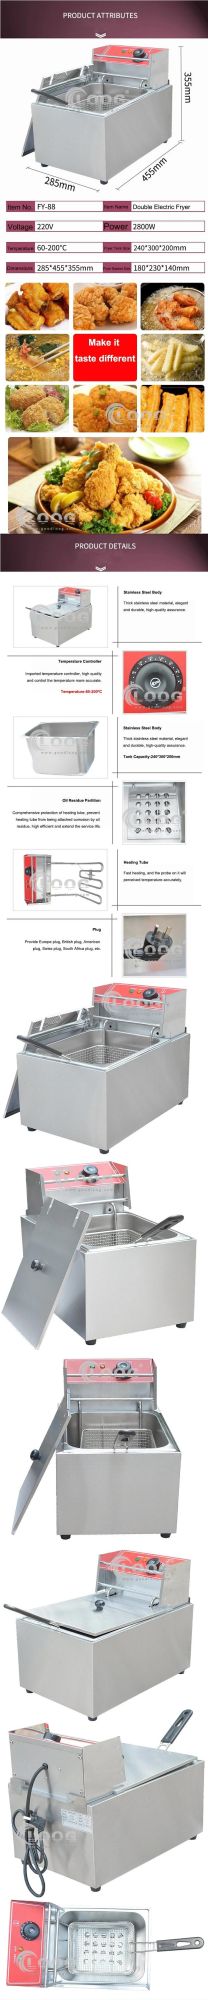 Electric Single Stainless Steel Basket Churros Frying Machine Donuts Maker Catering Equipment Countertop French Fries Fryer